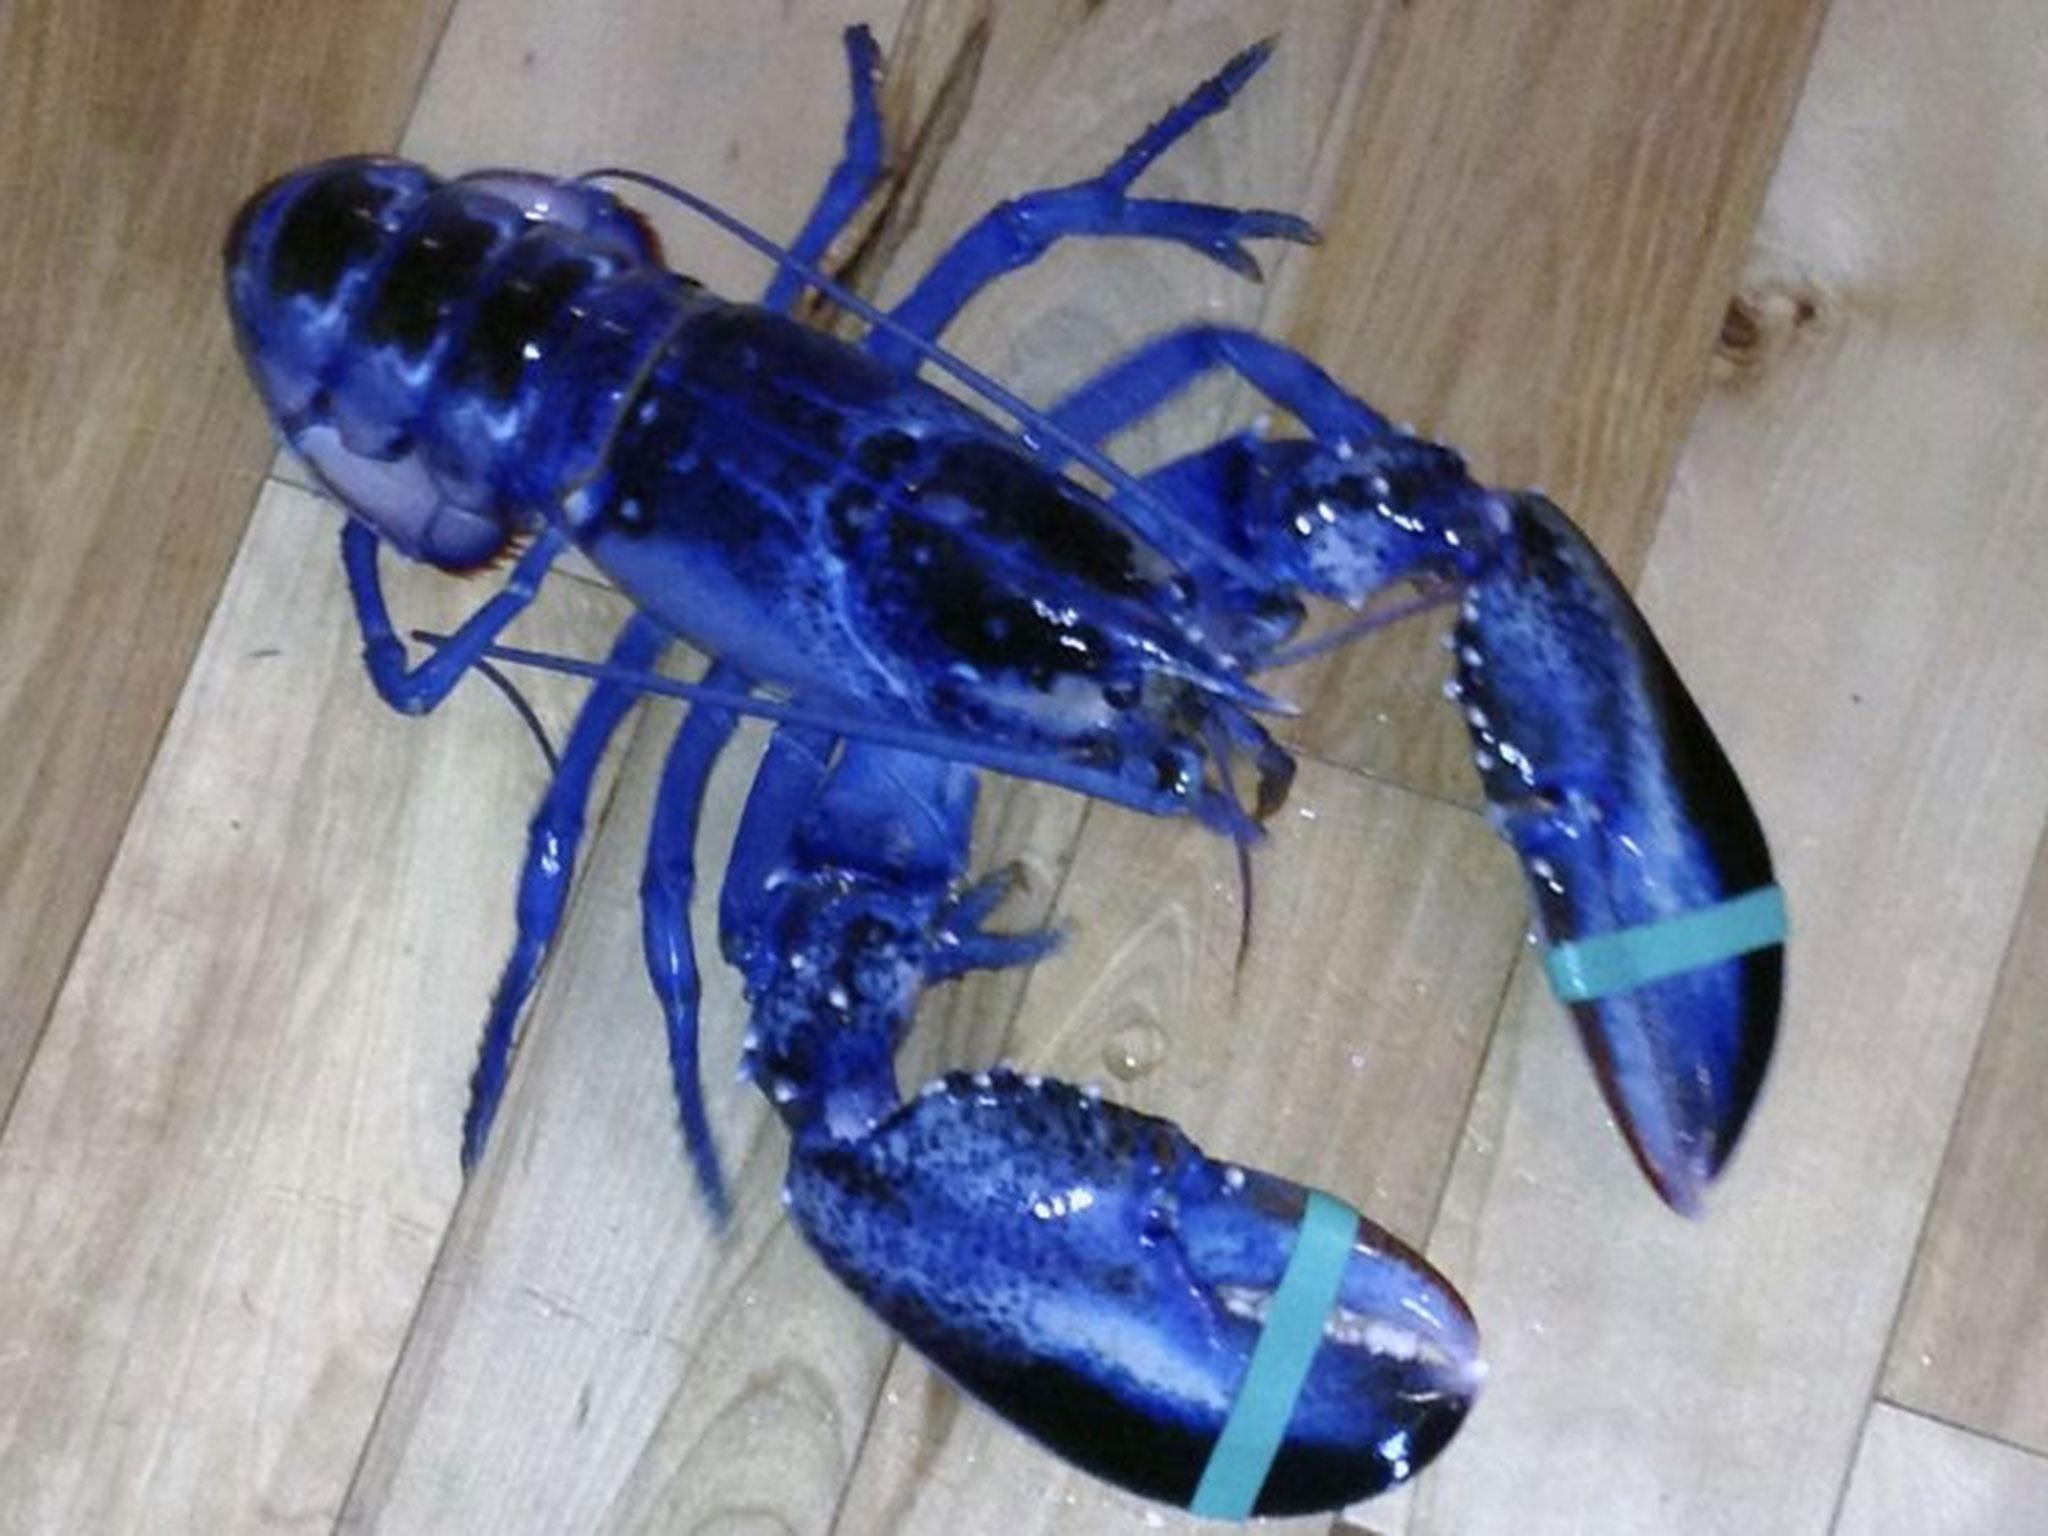 The Independent rare blue lobster has been found in the US state of Maine